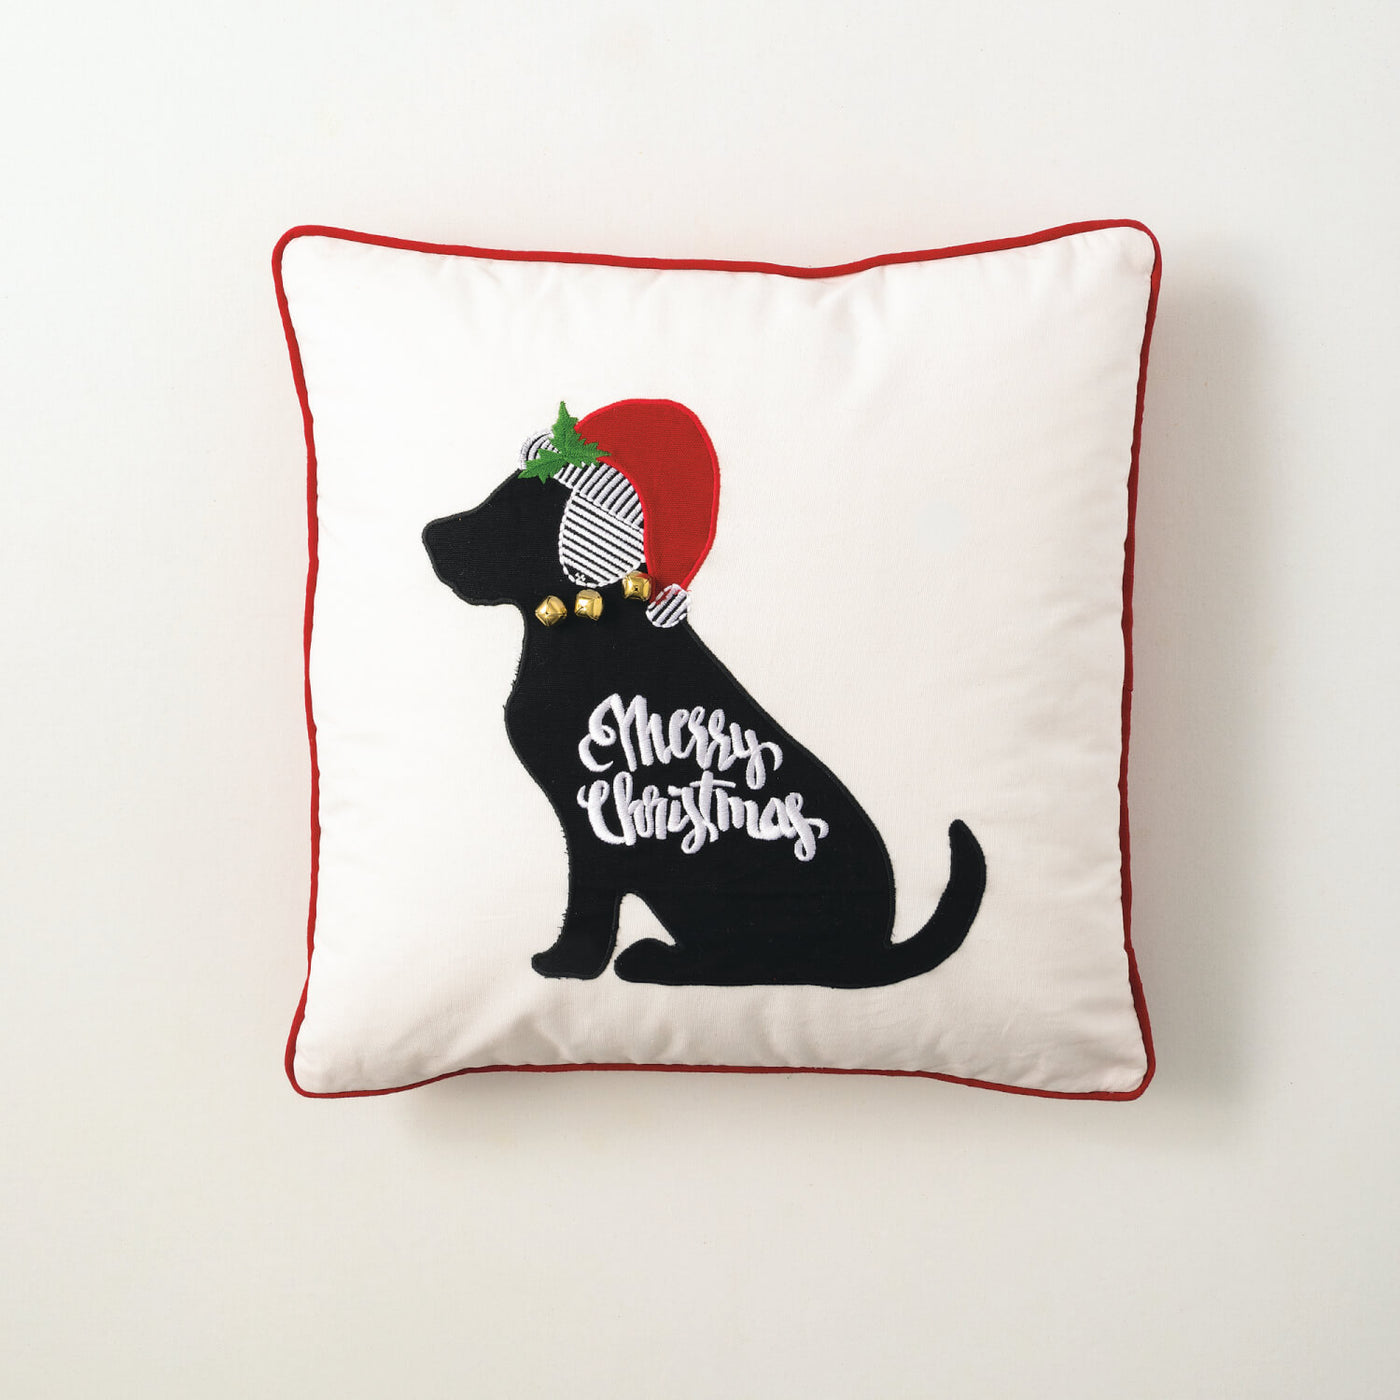 White throw pillow with embroidered black dog in a Santa hat and jingle bell collar reads Merry Christmas